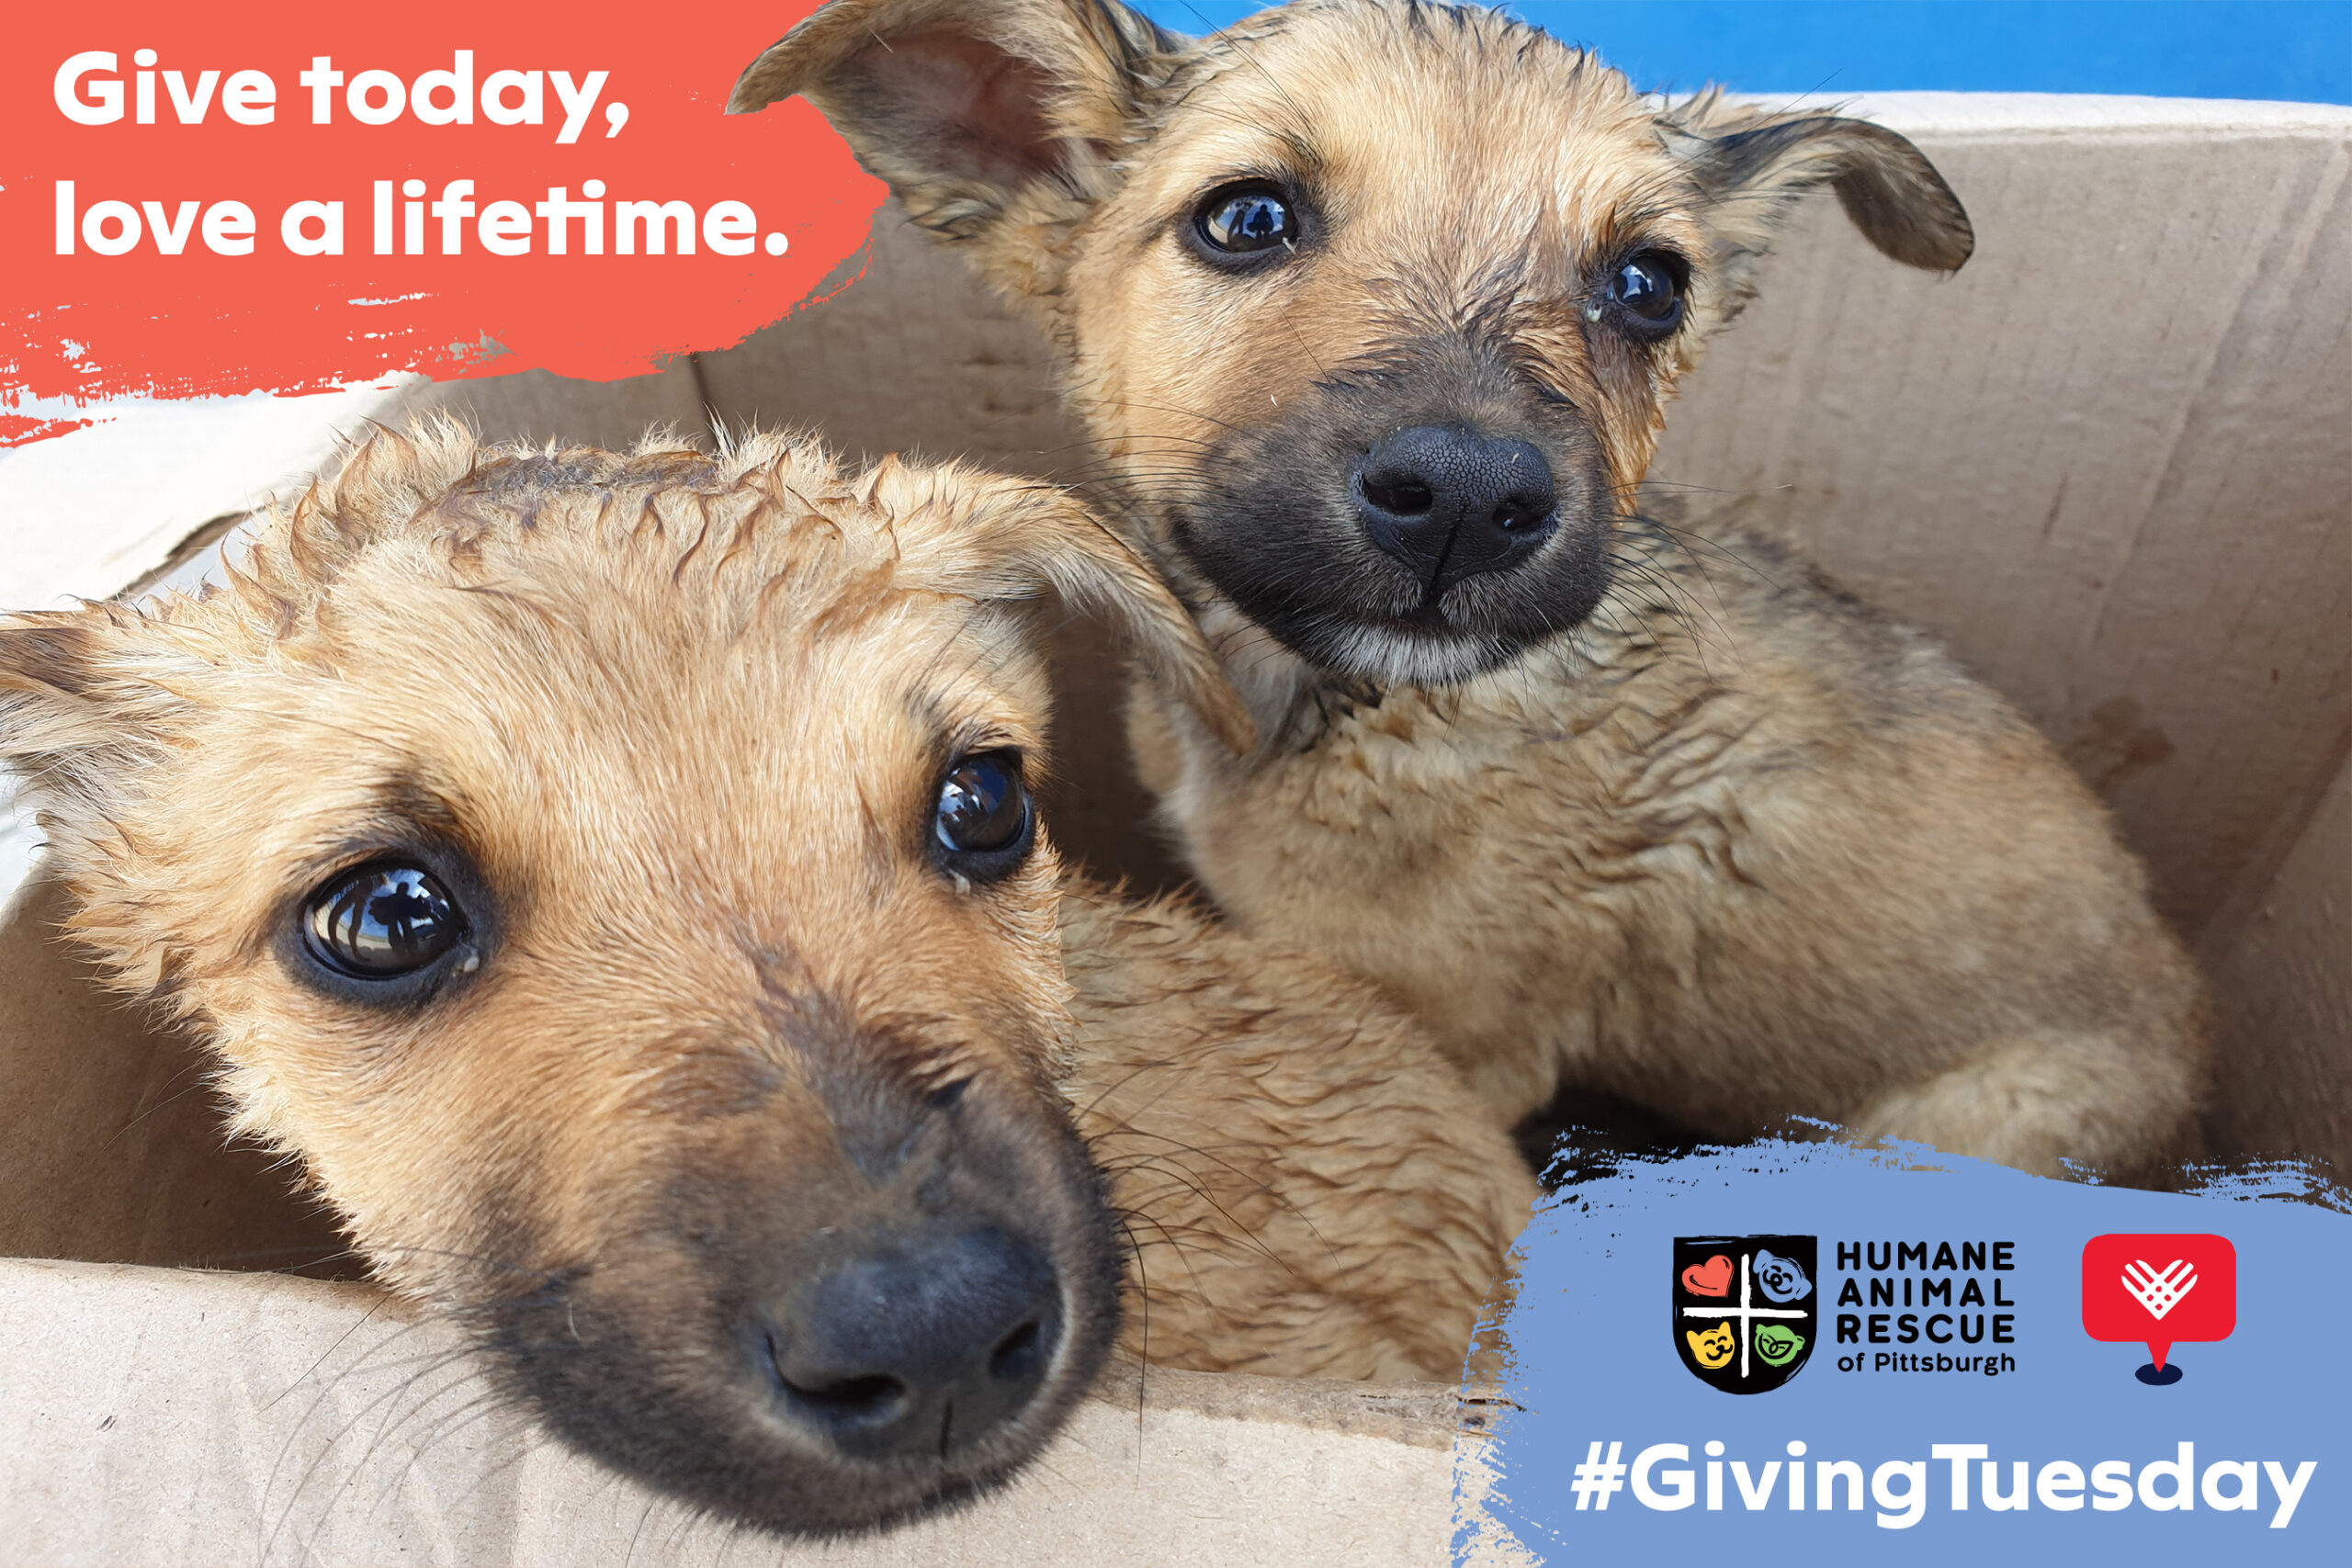 Ready, Set, Give! #GivingTuesday is Here! - Humane Animal Rescue